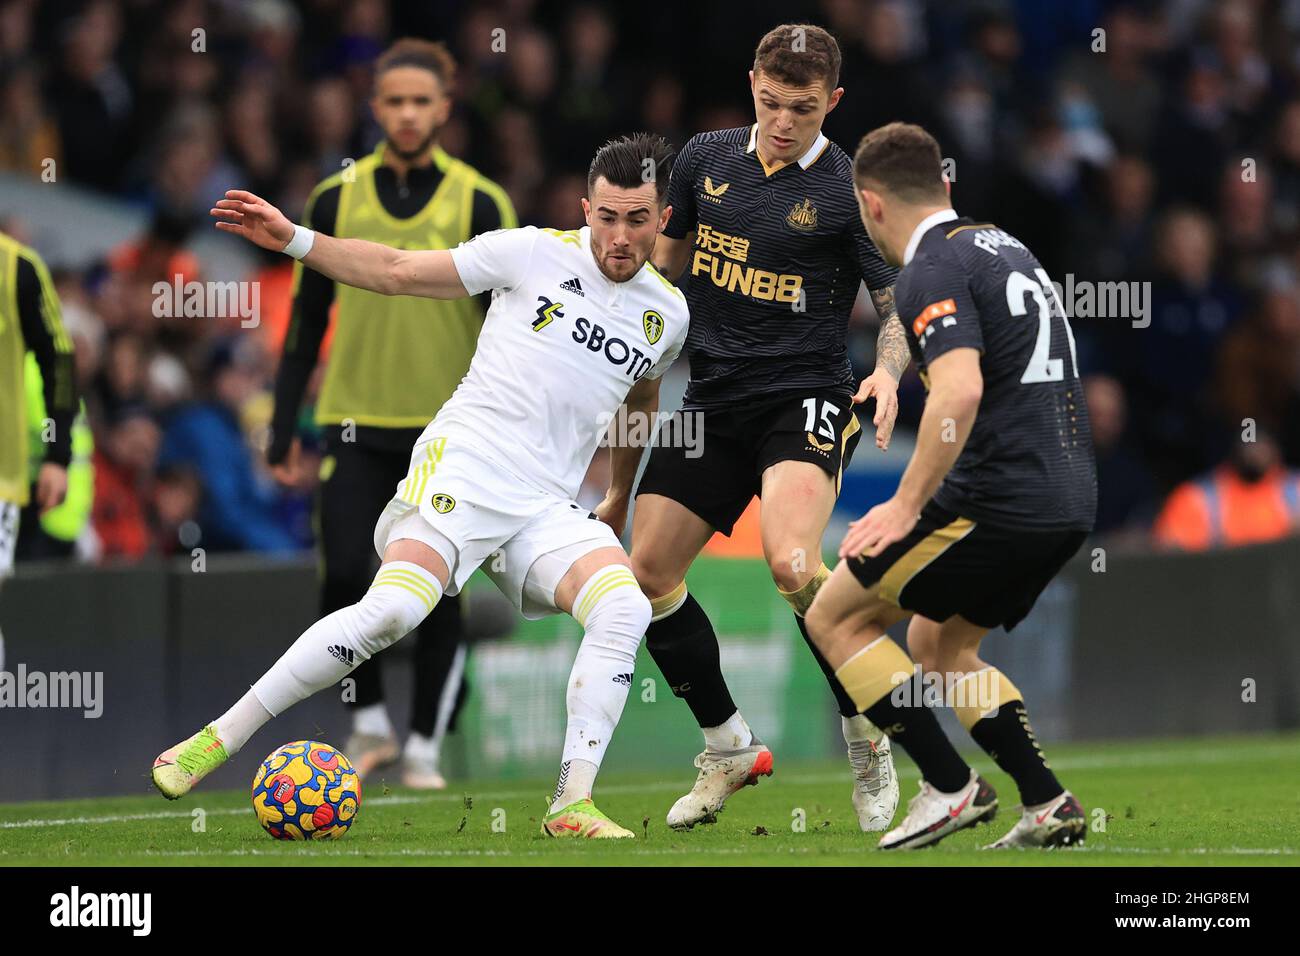 Leeds, UK. 22nd Jan, 2022. Jack Harrison #22 of Leeds United holds the ball from Ryan Fraser #21 of Newcastle United and Kieran Trippier #15 of Newcastle United during the Premier League fixture Leeds United vs Newcastle United at Elland Road, Leeds, UK, 22nd January 2022 Credit: News Images /Alamy Live News Stock Photo